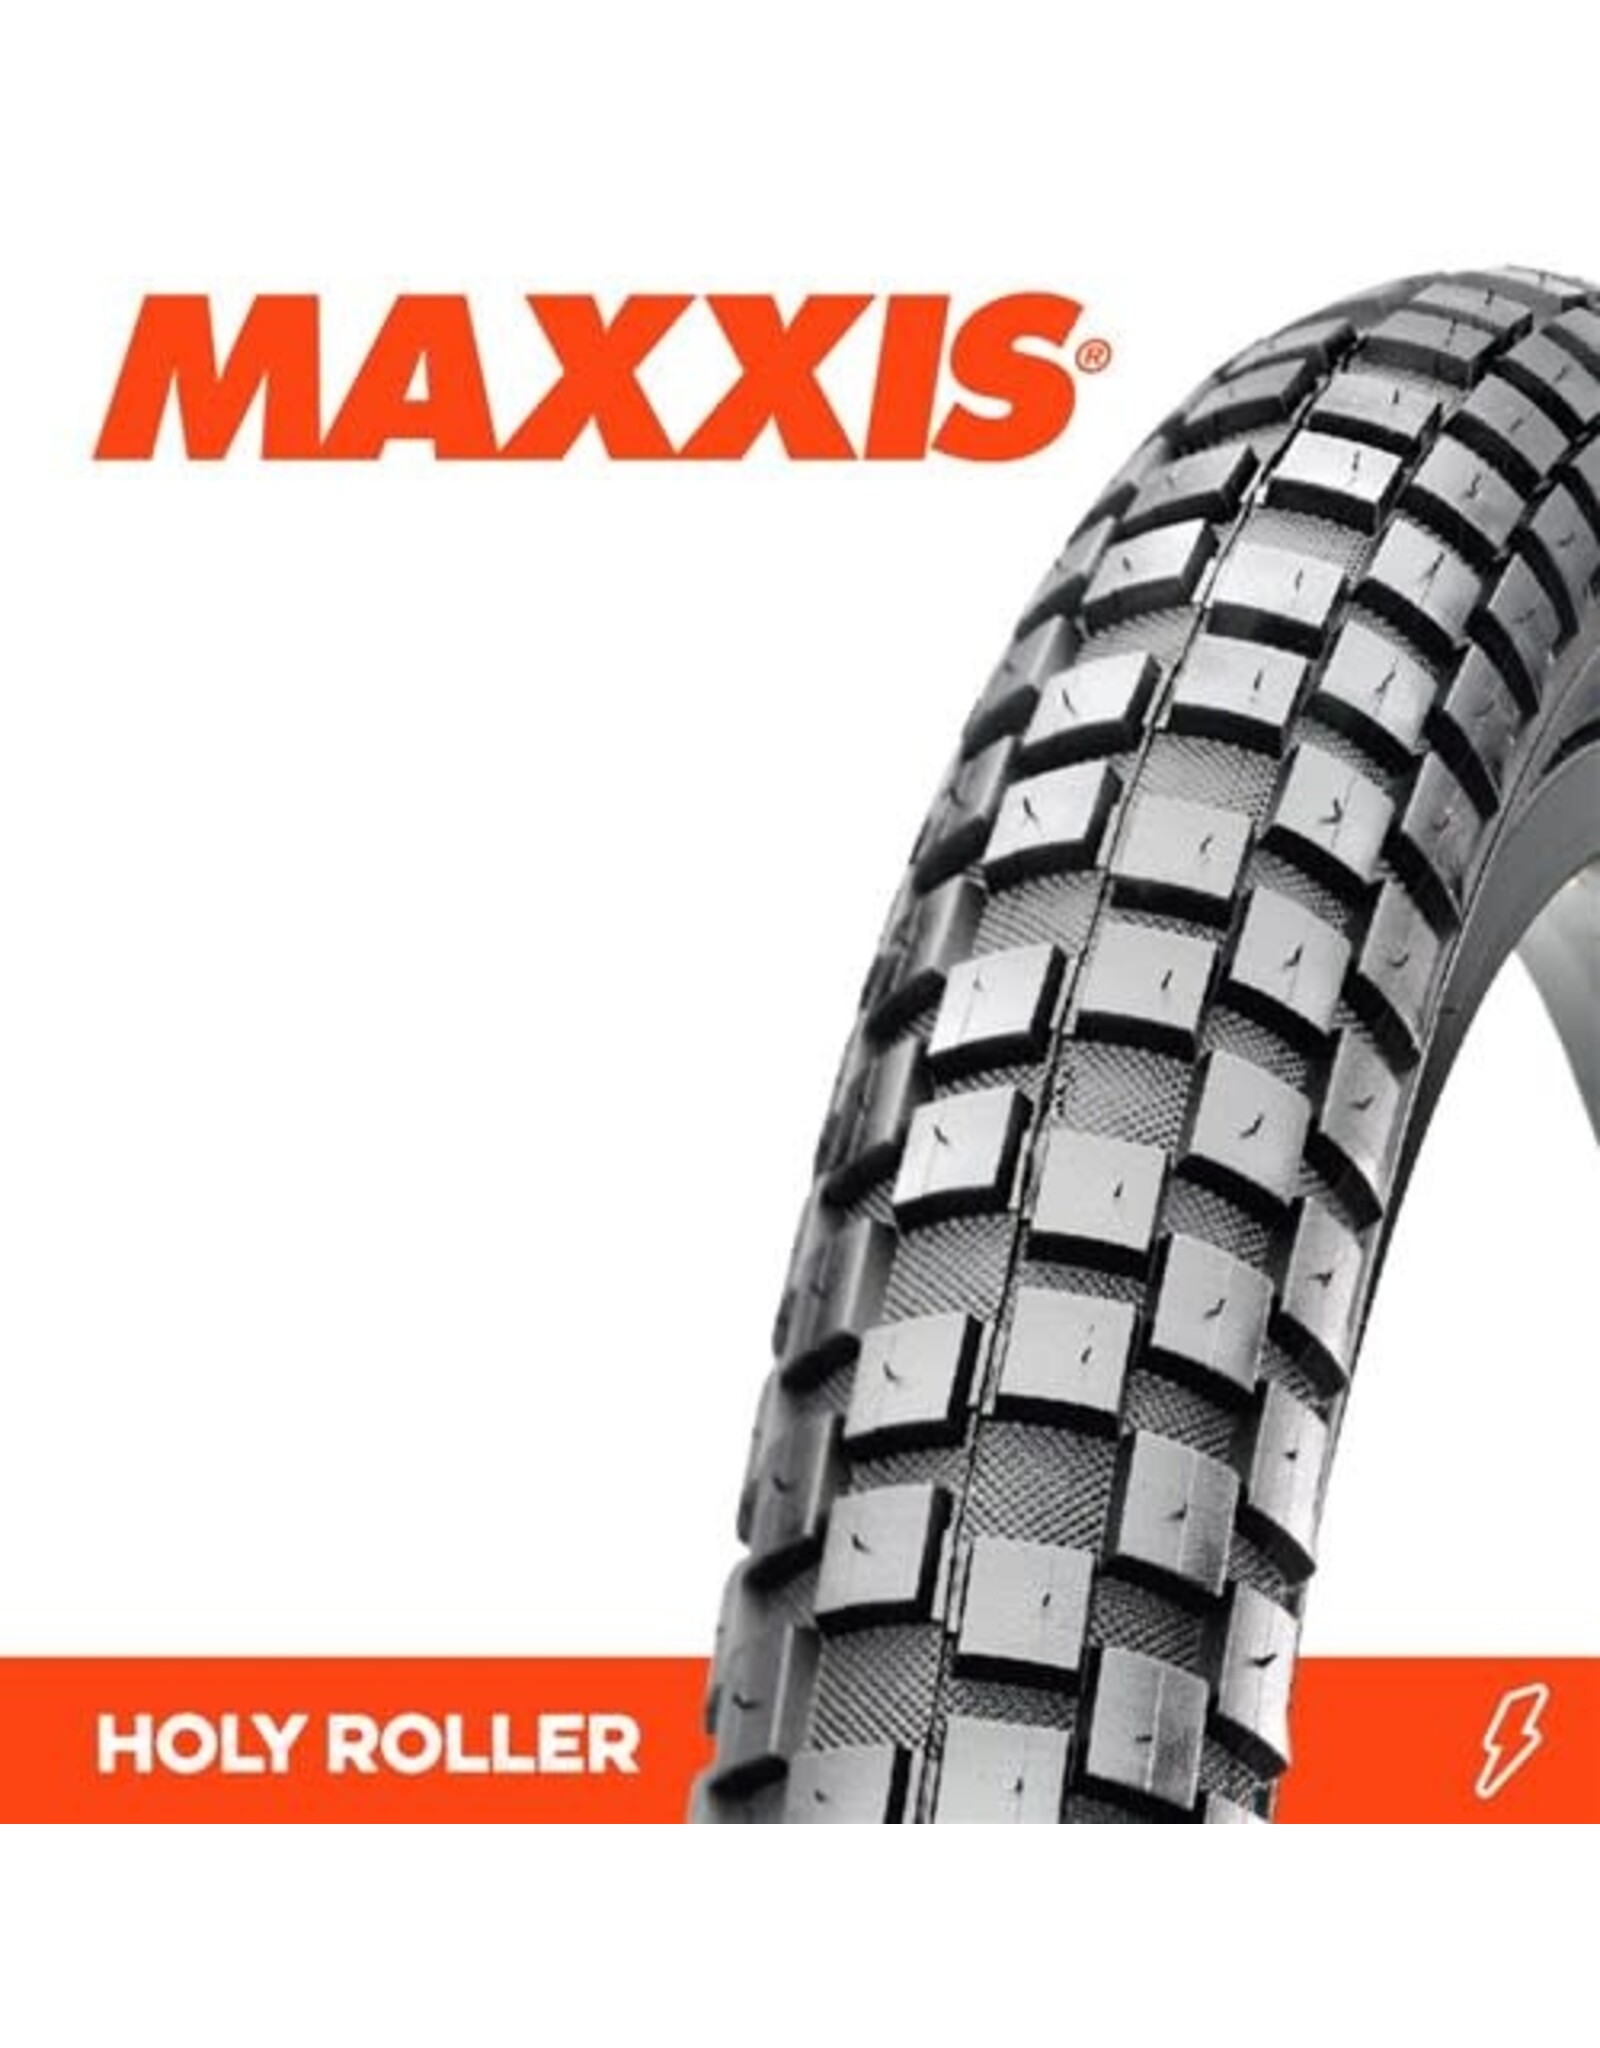 MAXXIS MAXXIS HOLY ROLLER 26 X 2.40" WIRE 60 TPI TYRE